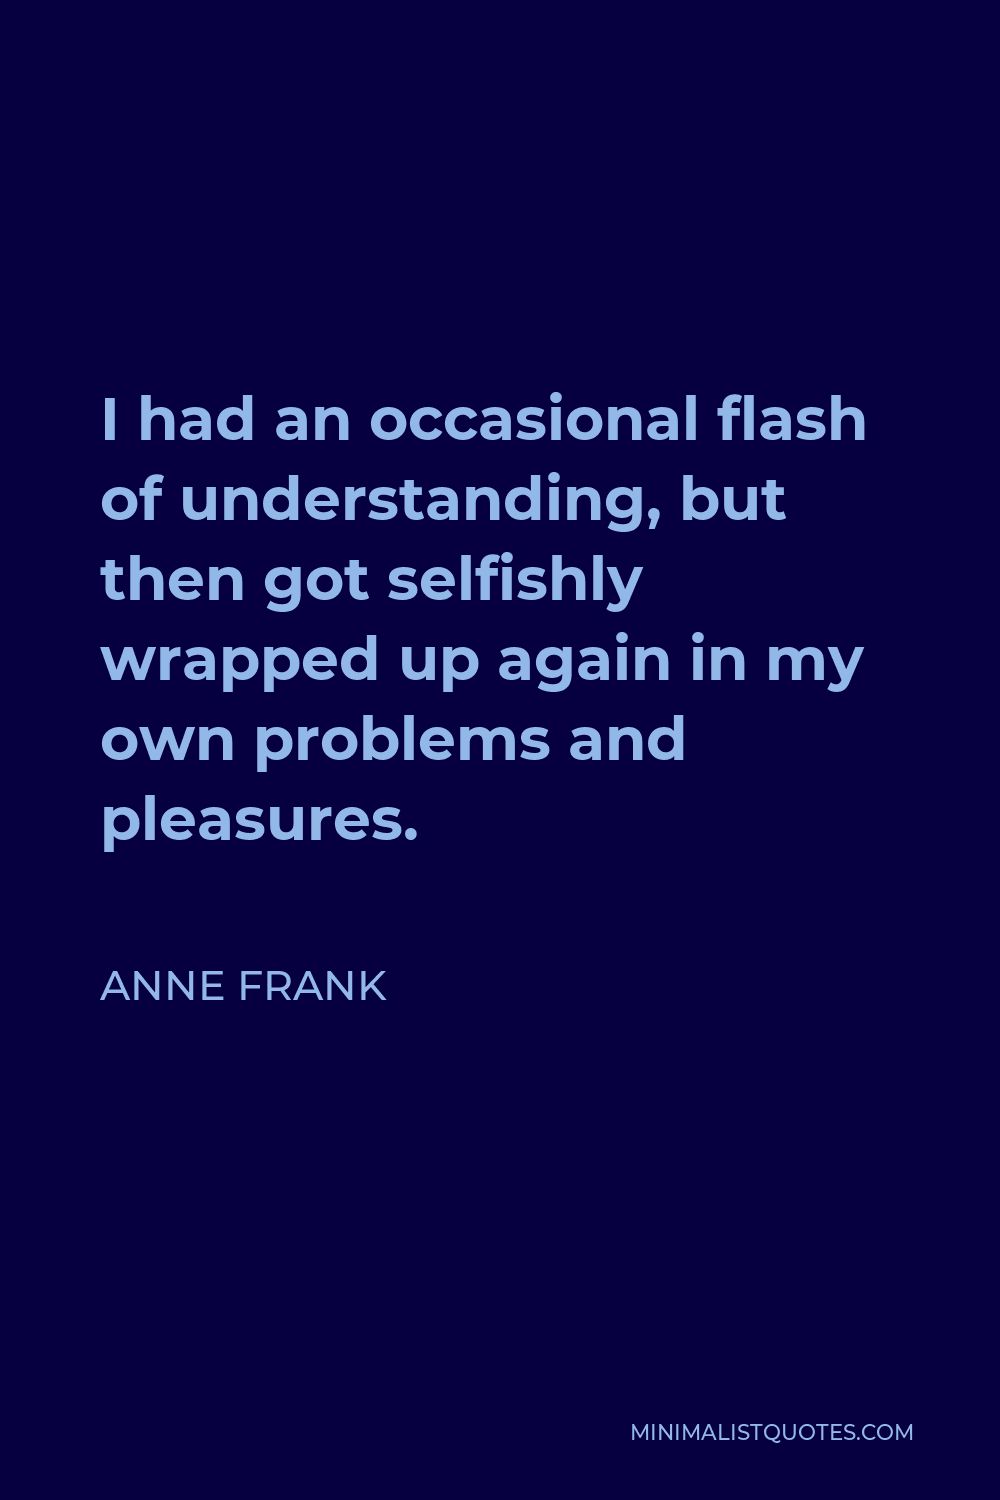 Anne Frank Quote - I had an occasional flash of understanding, but then got selfishly wrapped up again in my own problems and pleasures.